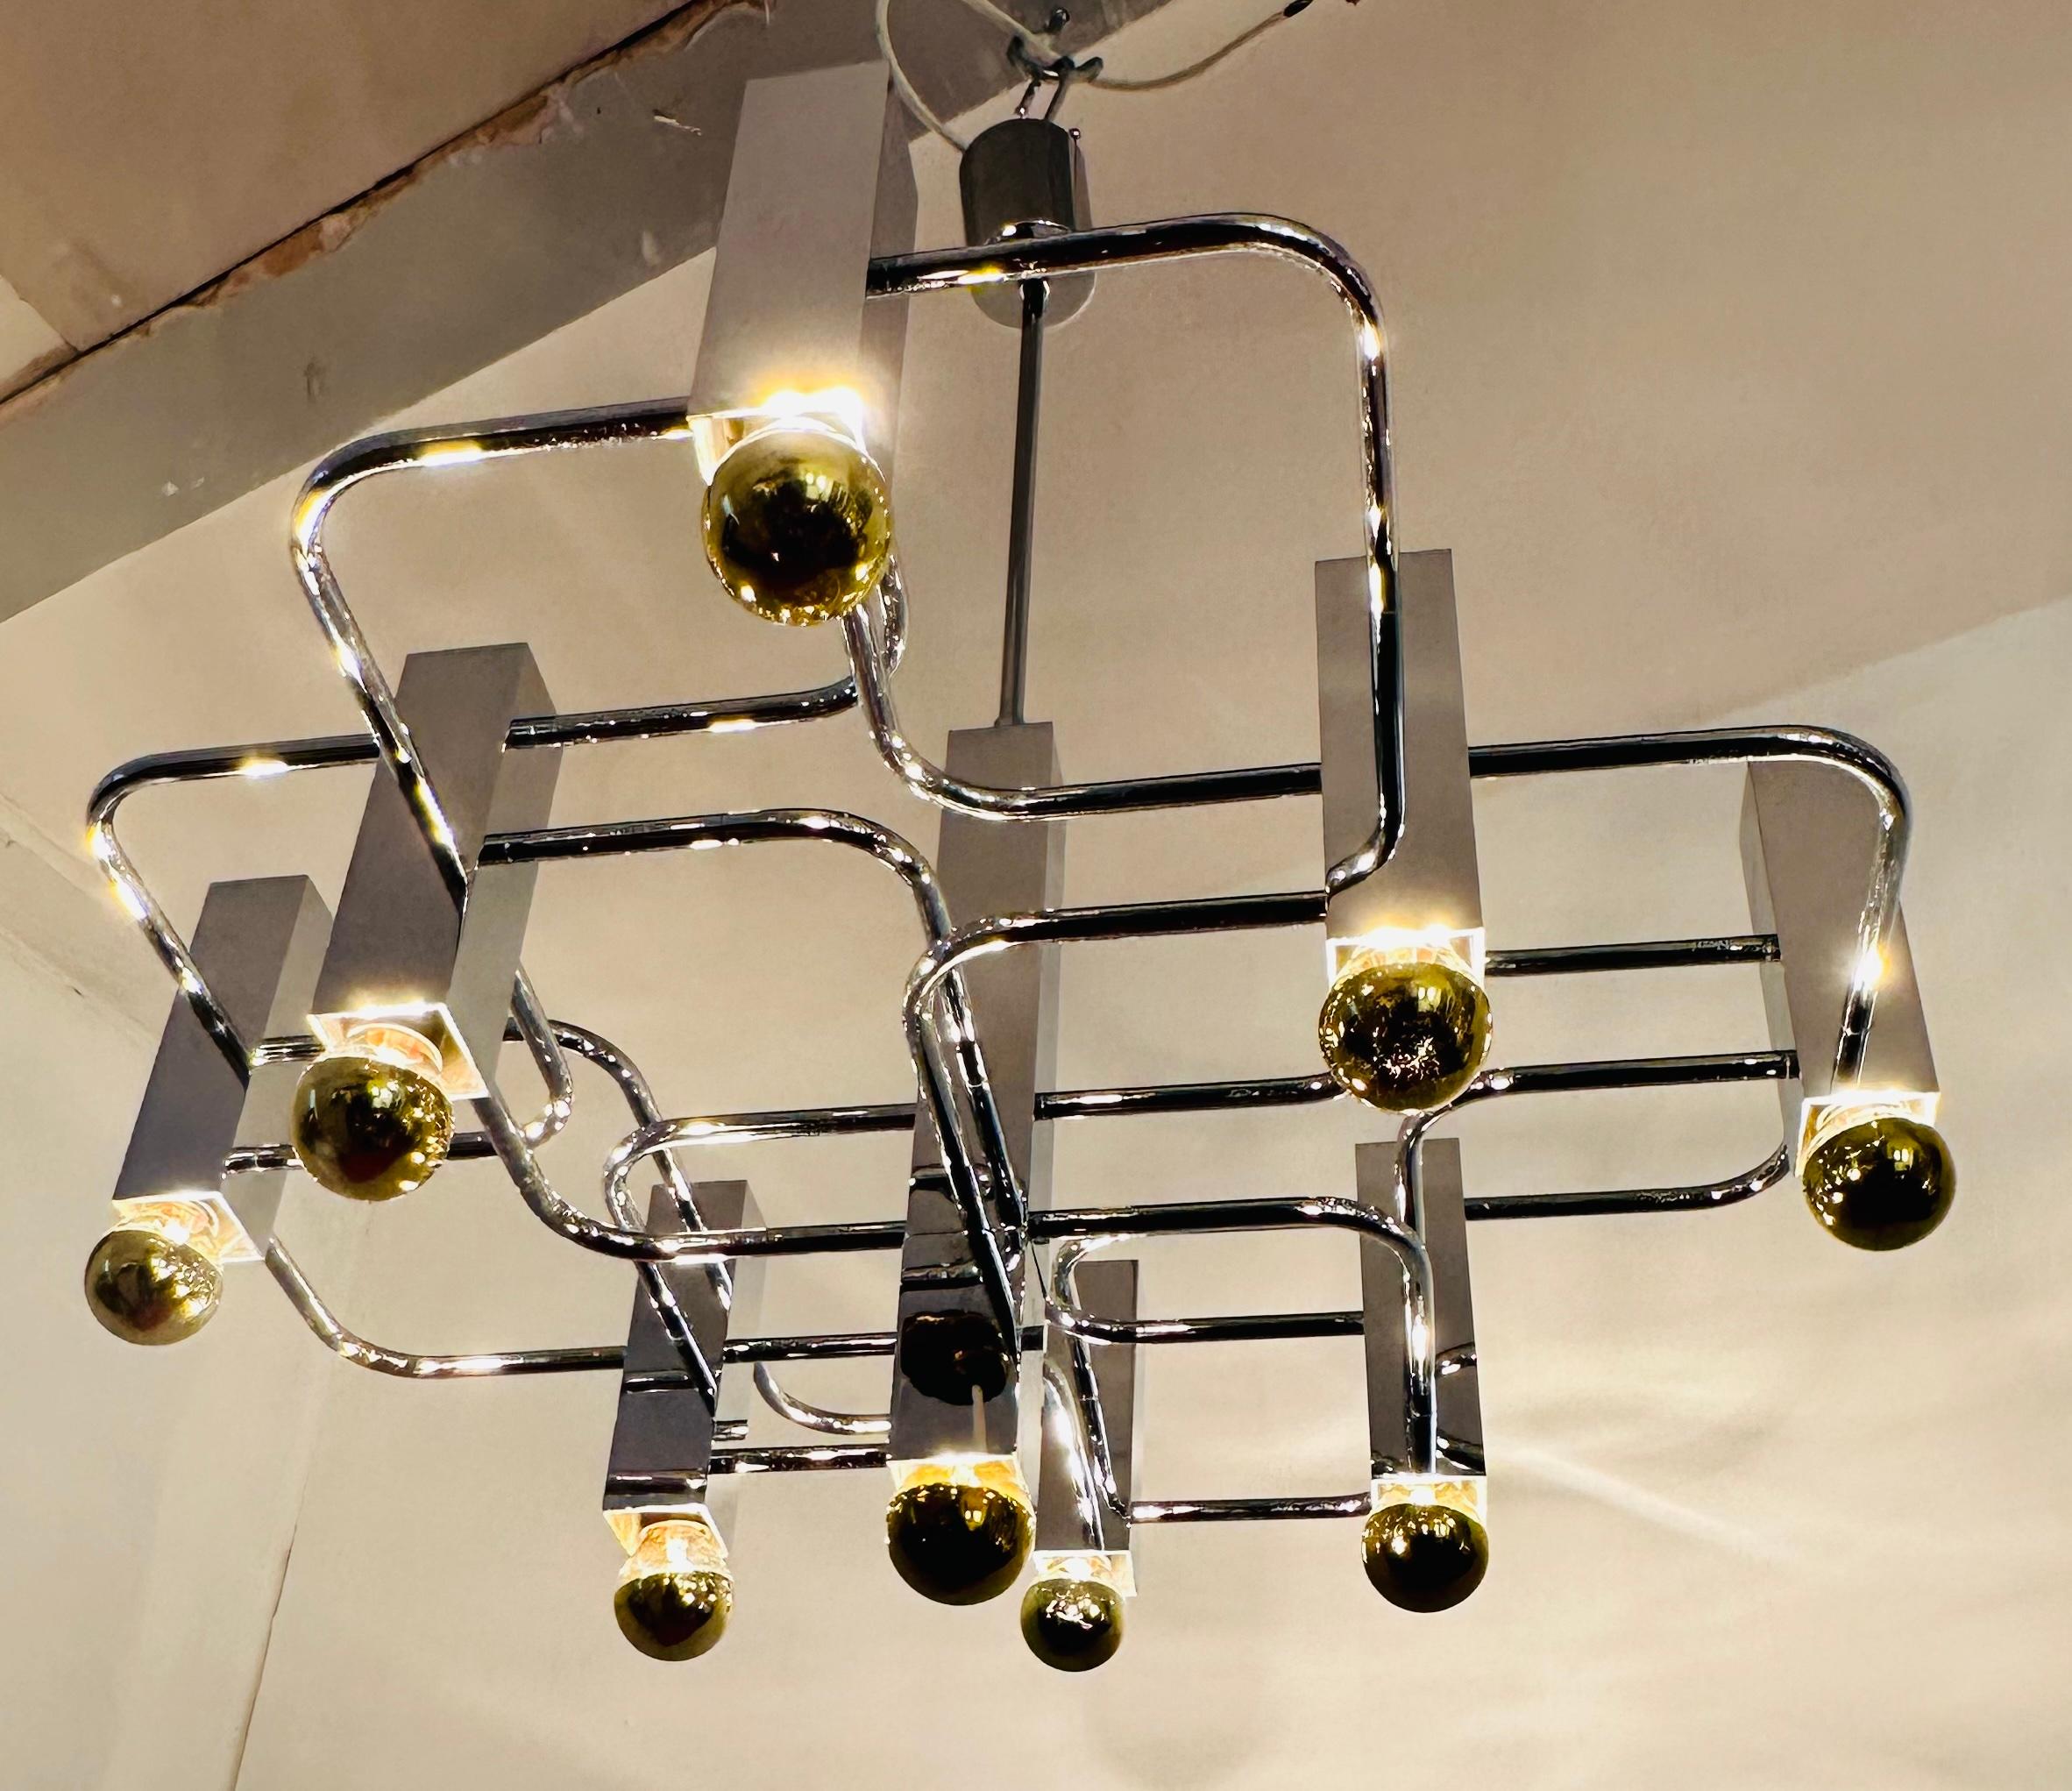 A stunning and striking polished chromed-metal geometric chandelier designed by Gaetano Sciolari for S.A. Boulanger in Italy during the 1960s.  The 9 vertical chromed square bulb holders are connected by interconnecting horizontal thin chromed-metal